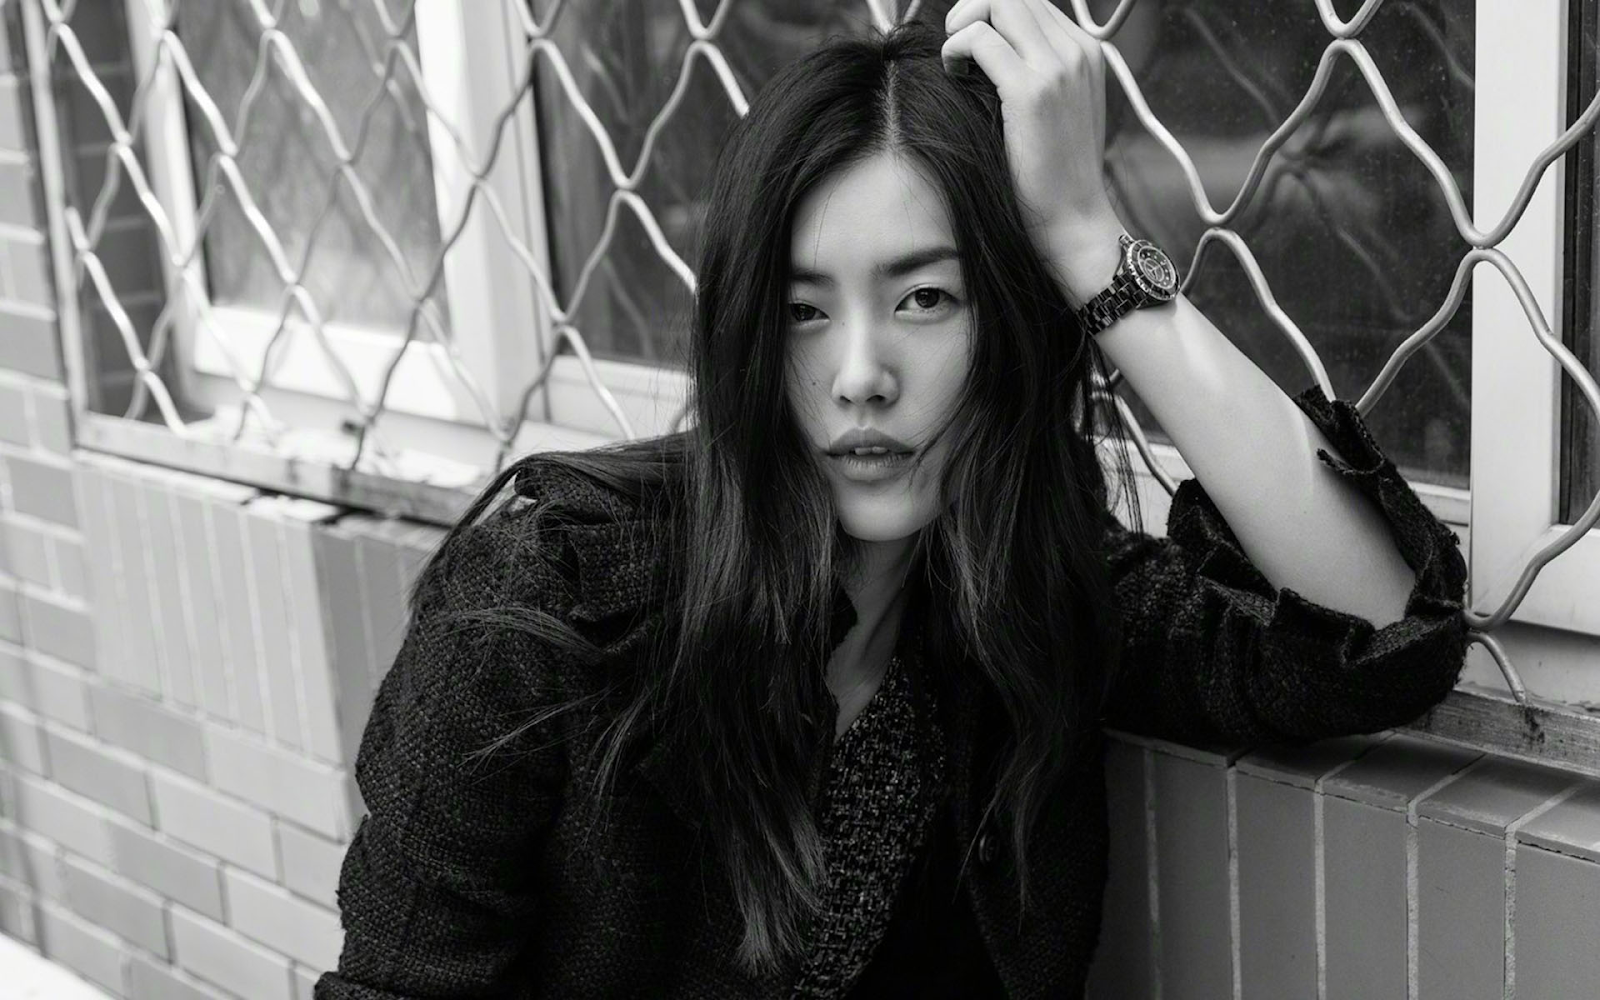 Victoria’s Secret model Liu Wen has been nominated by netizens as the perfect representation of the “high fashion face” ideal. Source: win4000.com